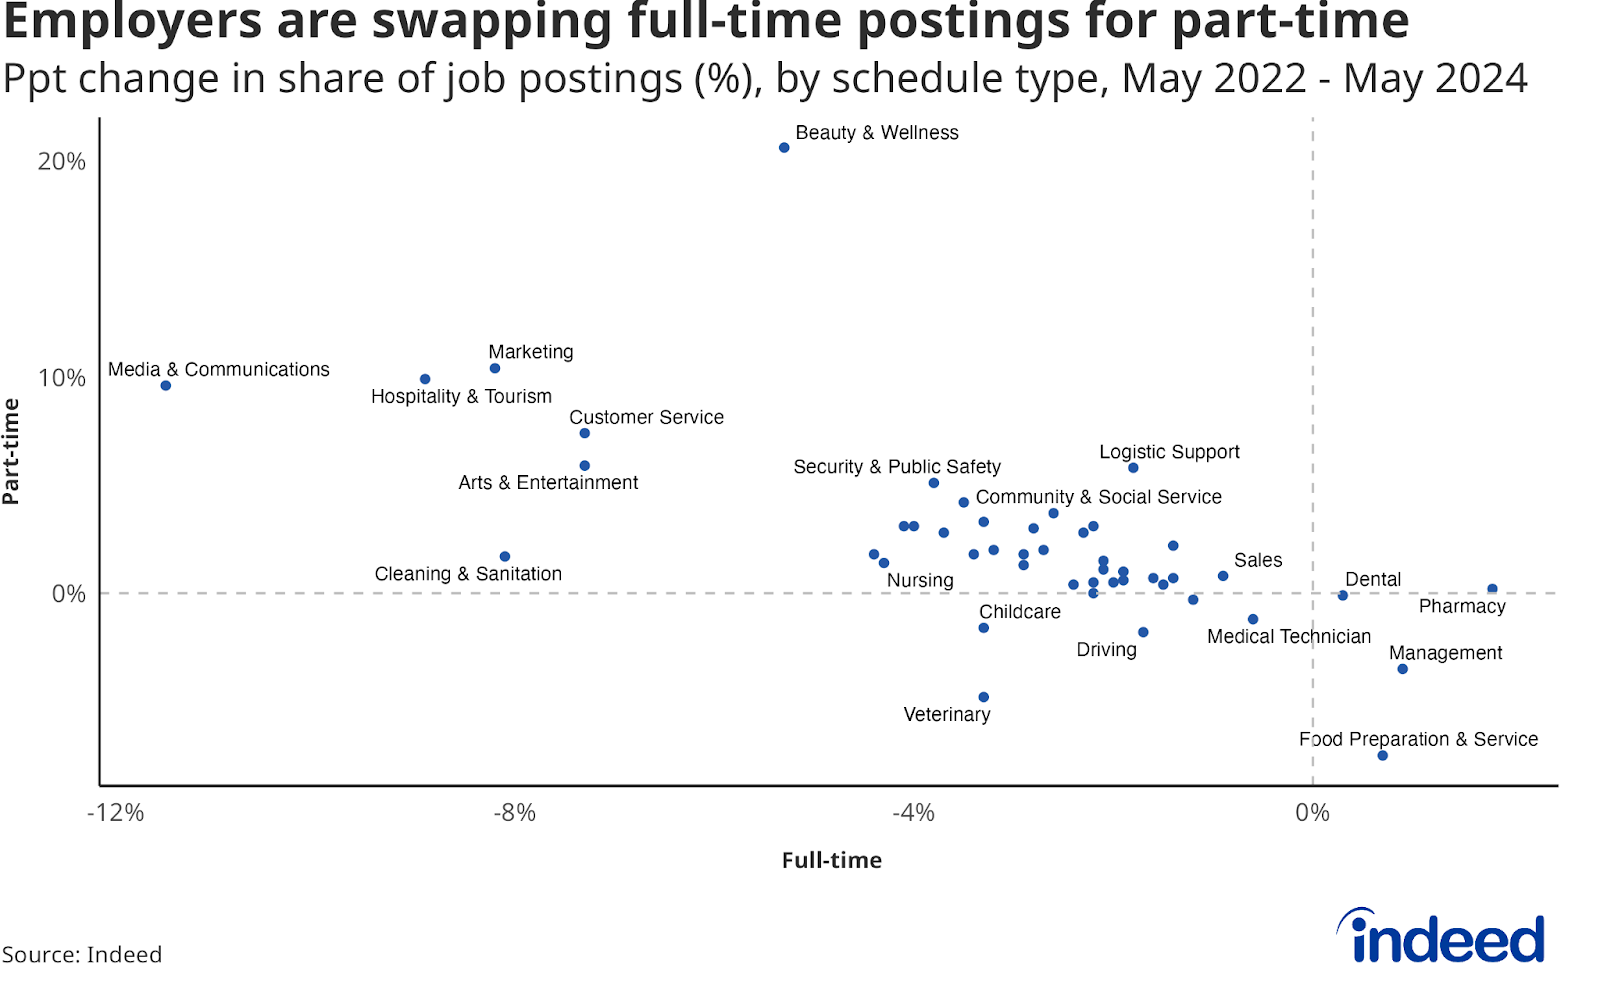 Scatter plot showing the percentage point change in the share of full-time job postings (x-axis) and part-time job postings (y-axis) from May 2022 to May 2024 by sector. The majority of sectors fall in the upper left quadrant, meaning that the share of part-time job postings grew while the share of full-time postings declined. 